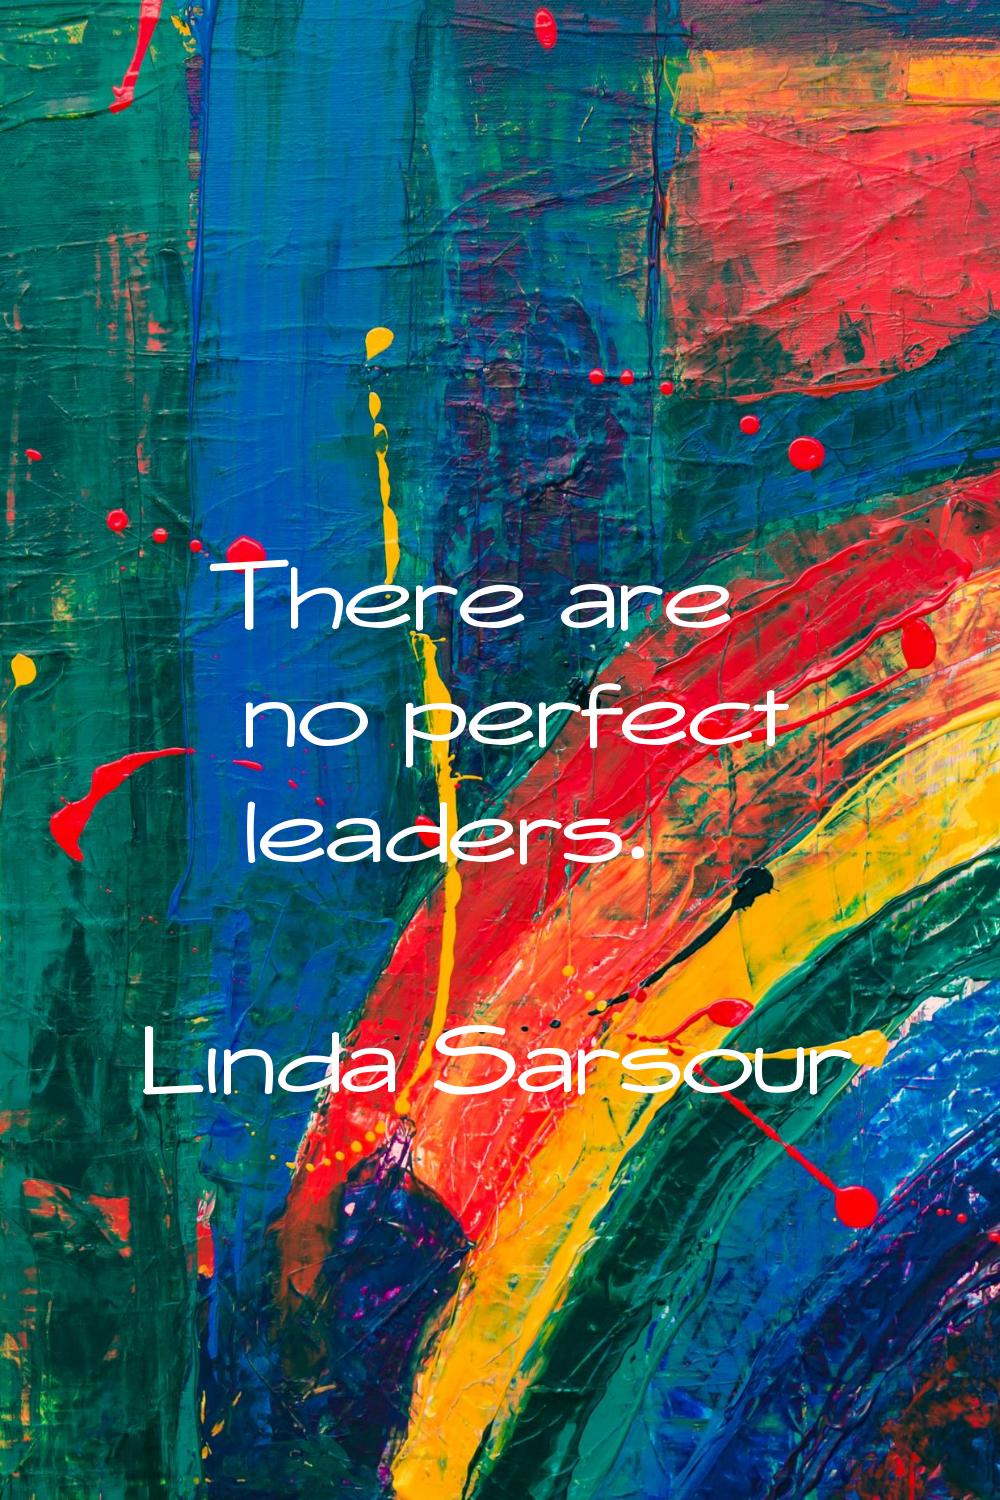 There are no perfect leaders.